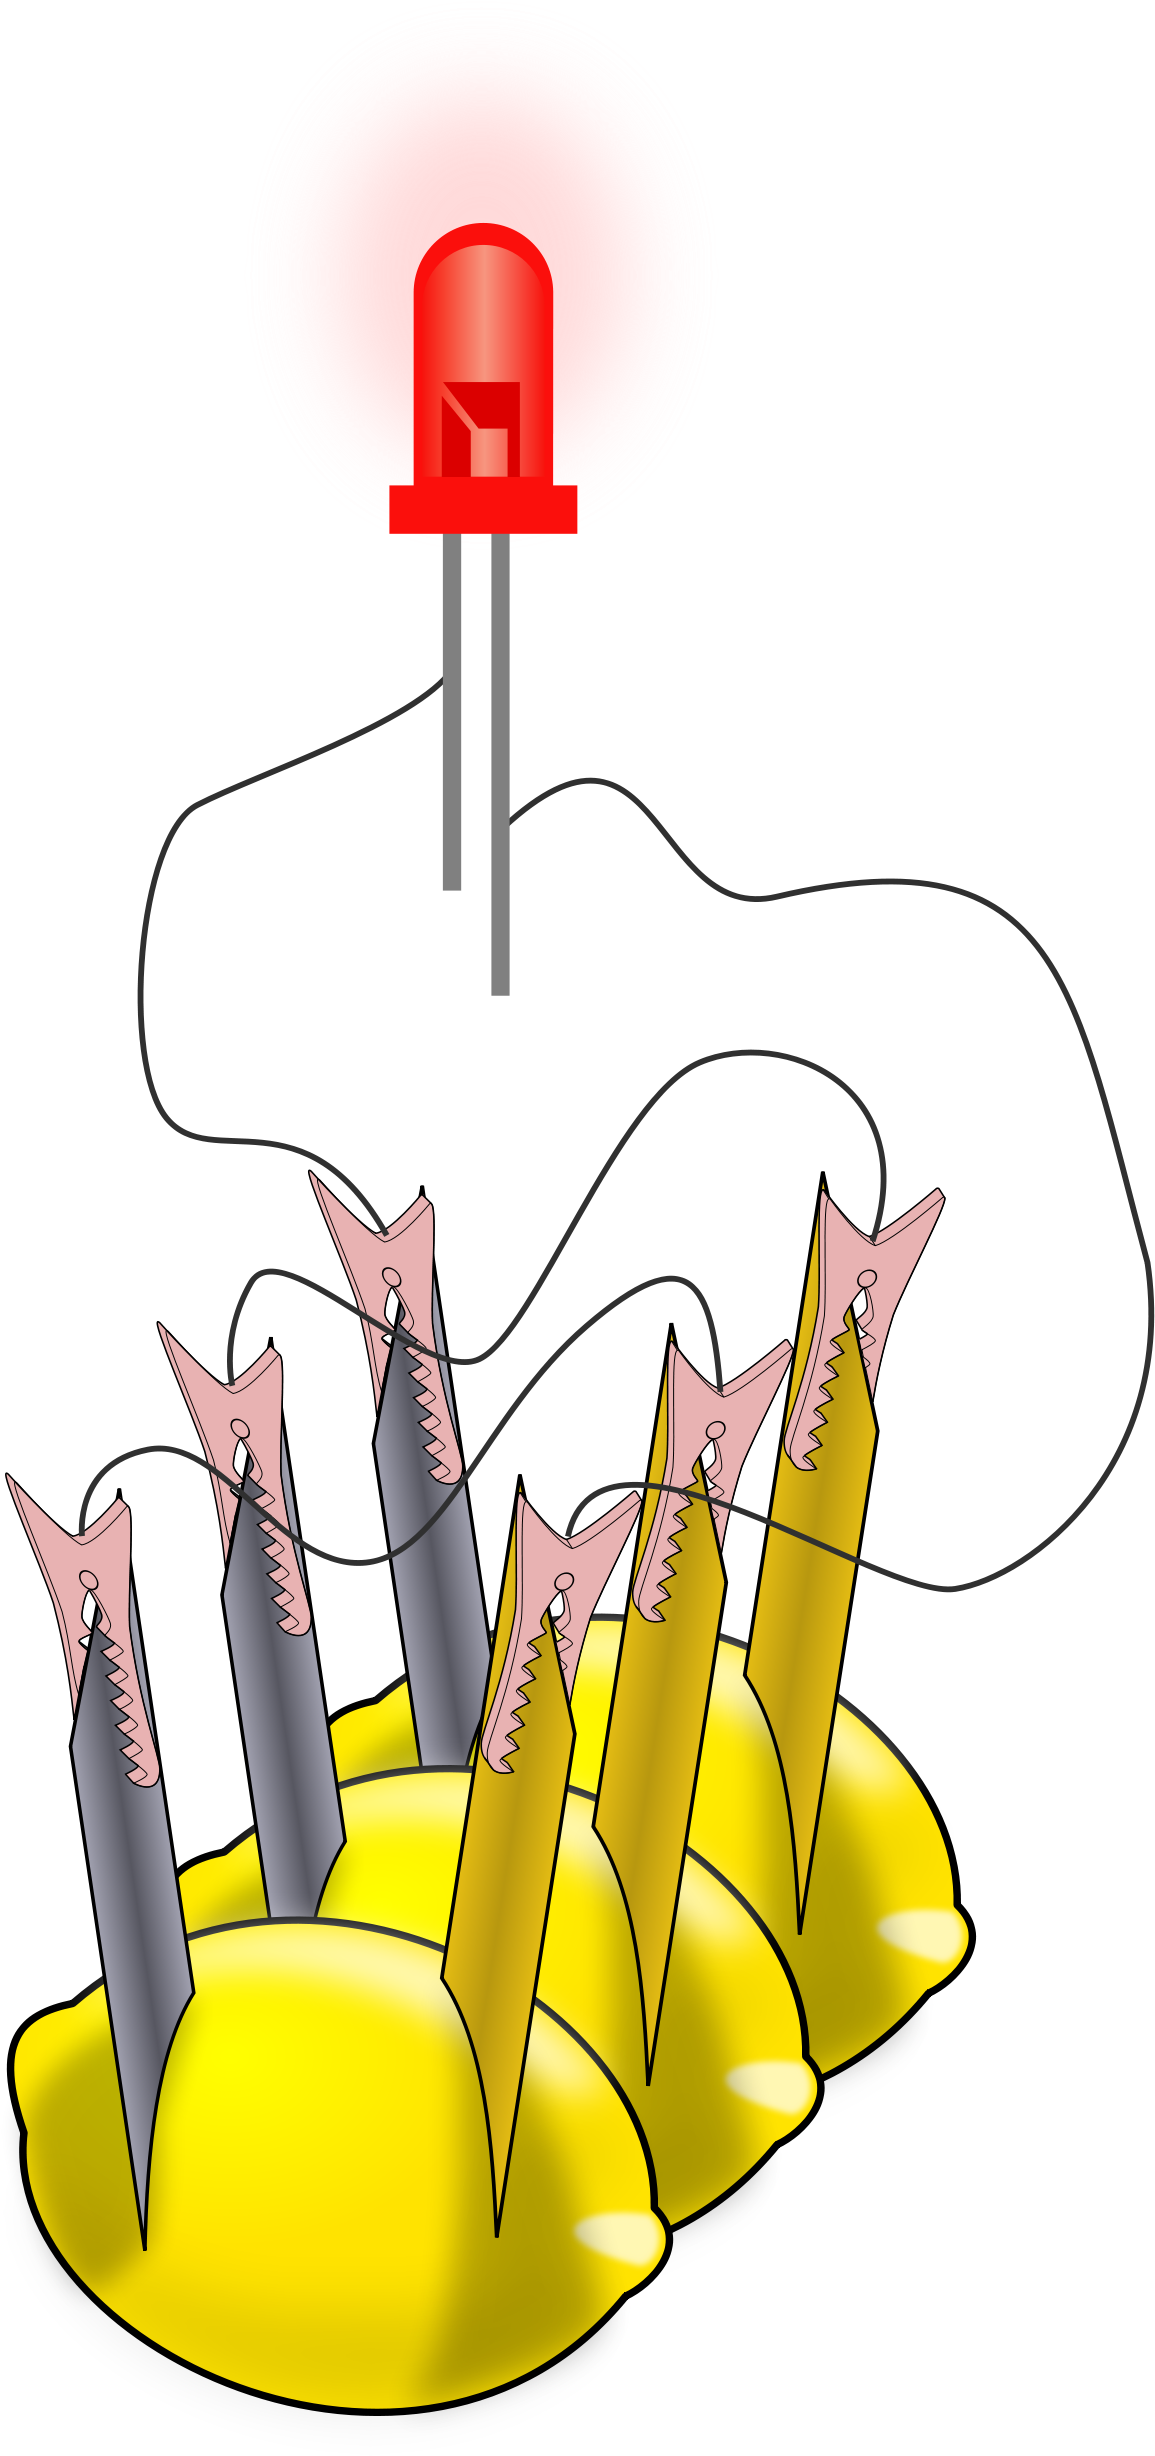 Lemon Battery Wikipedia Circuit Tree Clip Art Circuit - Chemical Effects Of Electric Current Class 8 Videos (1200x2499)